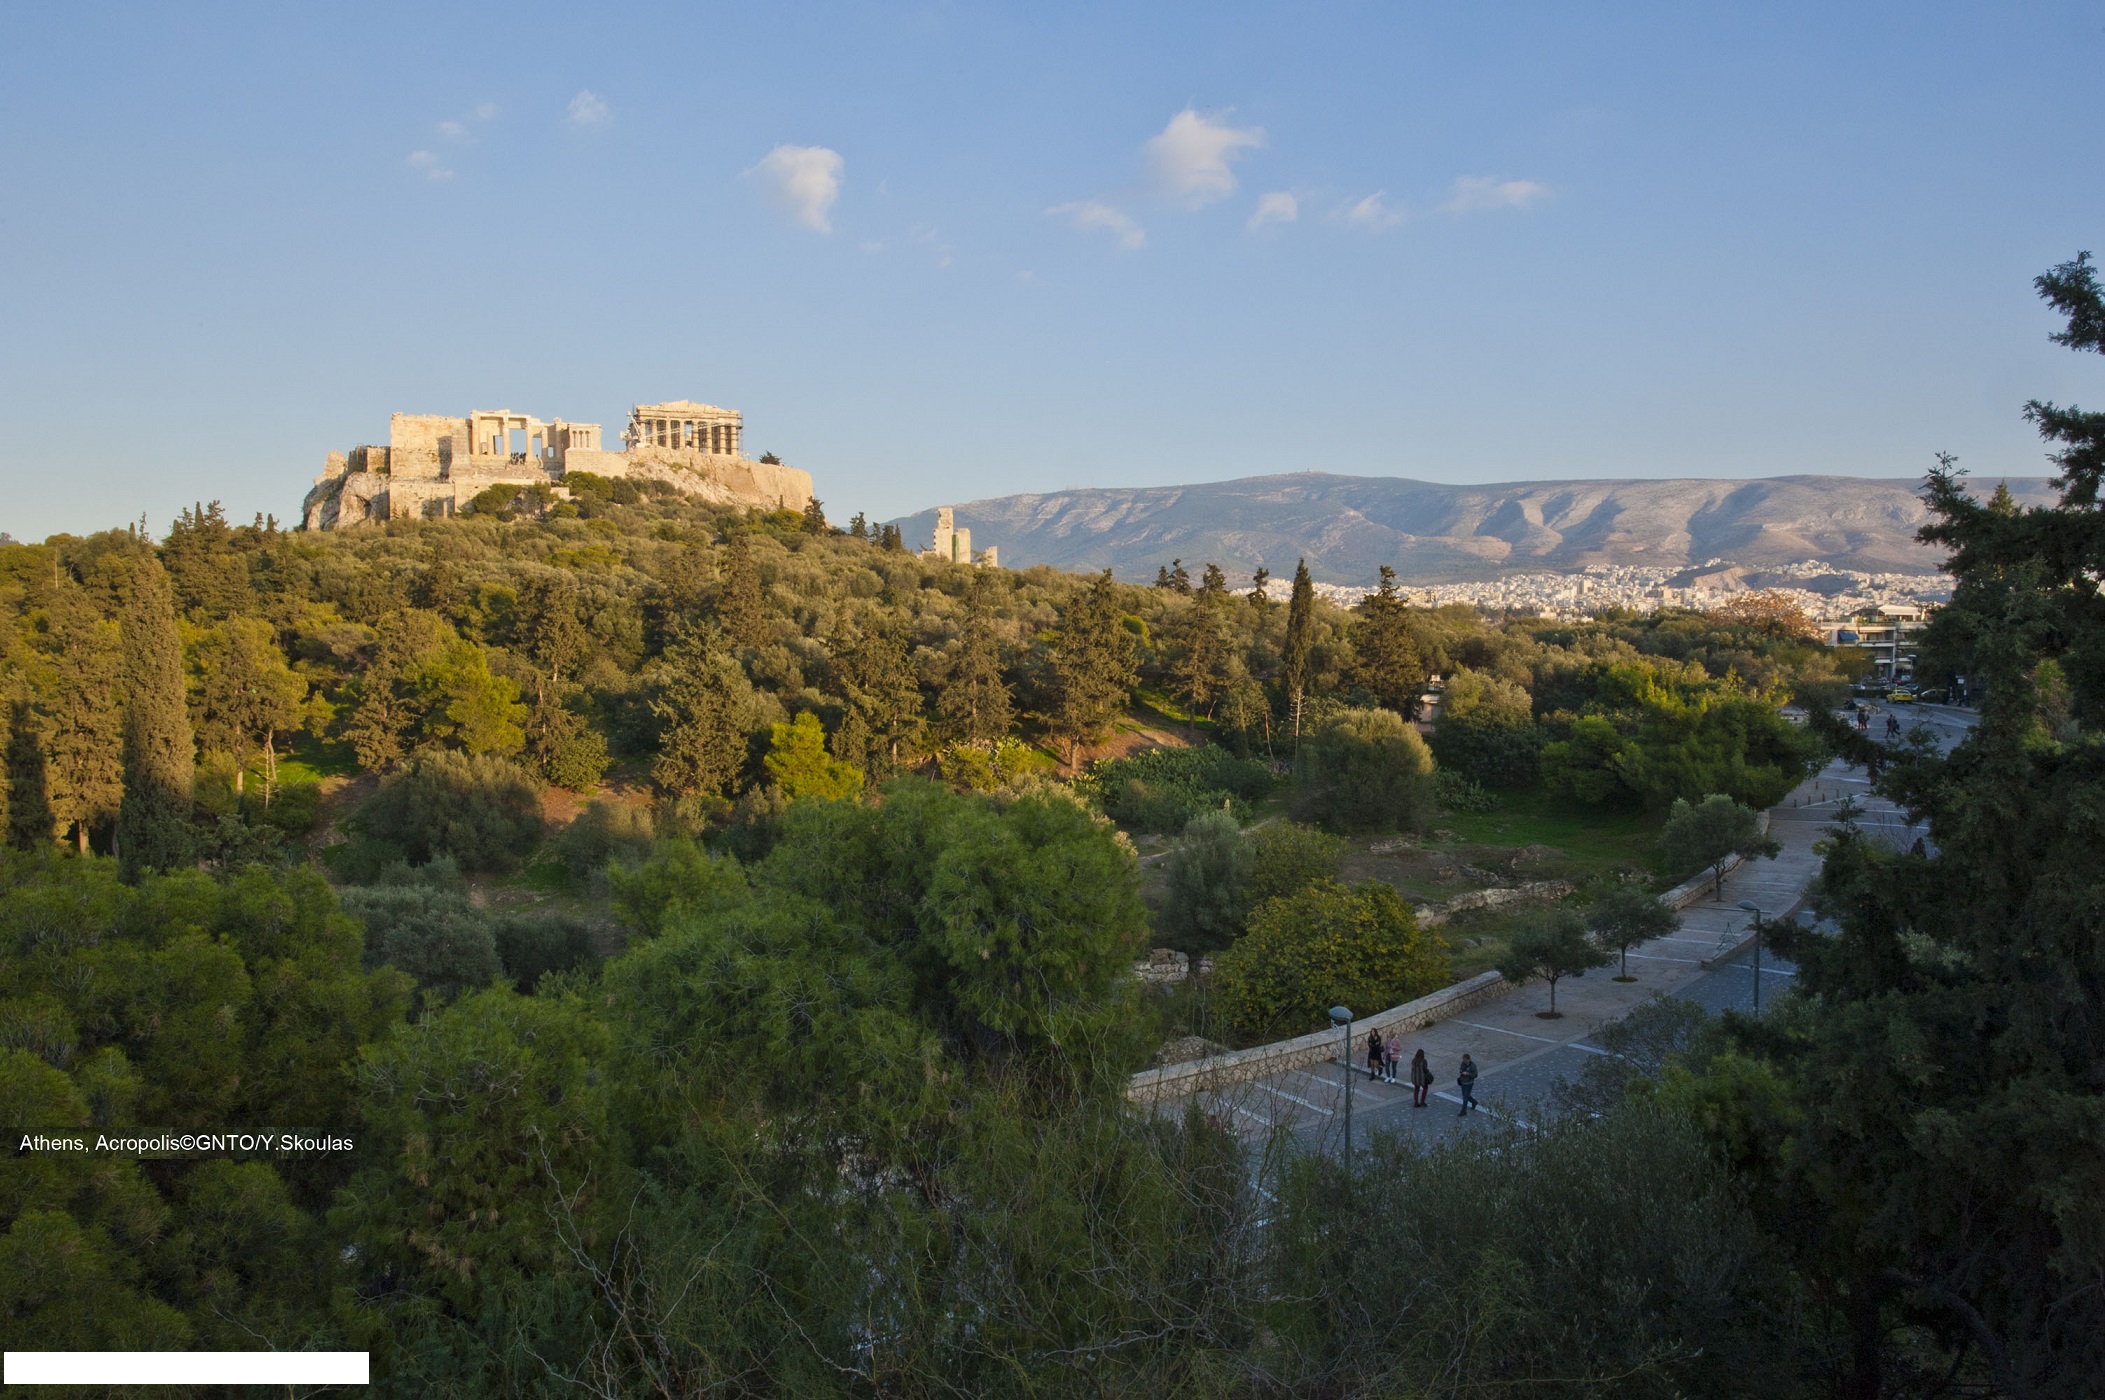 Athens a jewel for city travelers